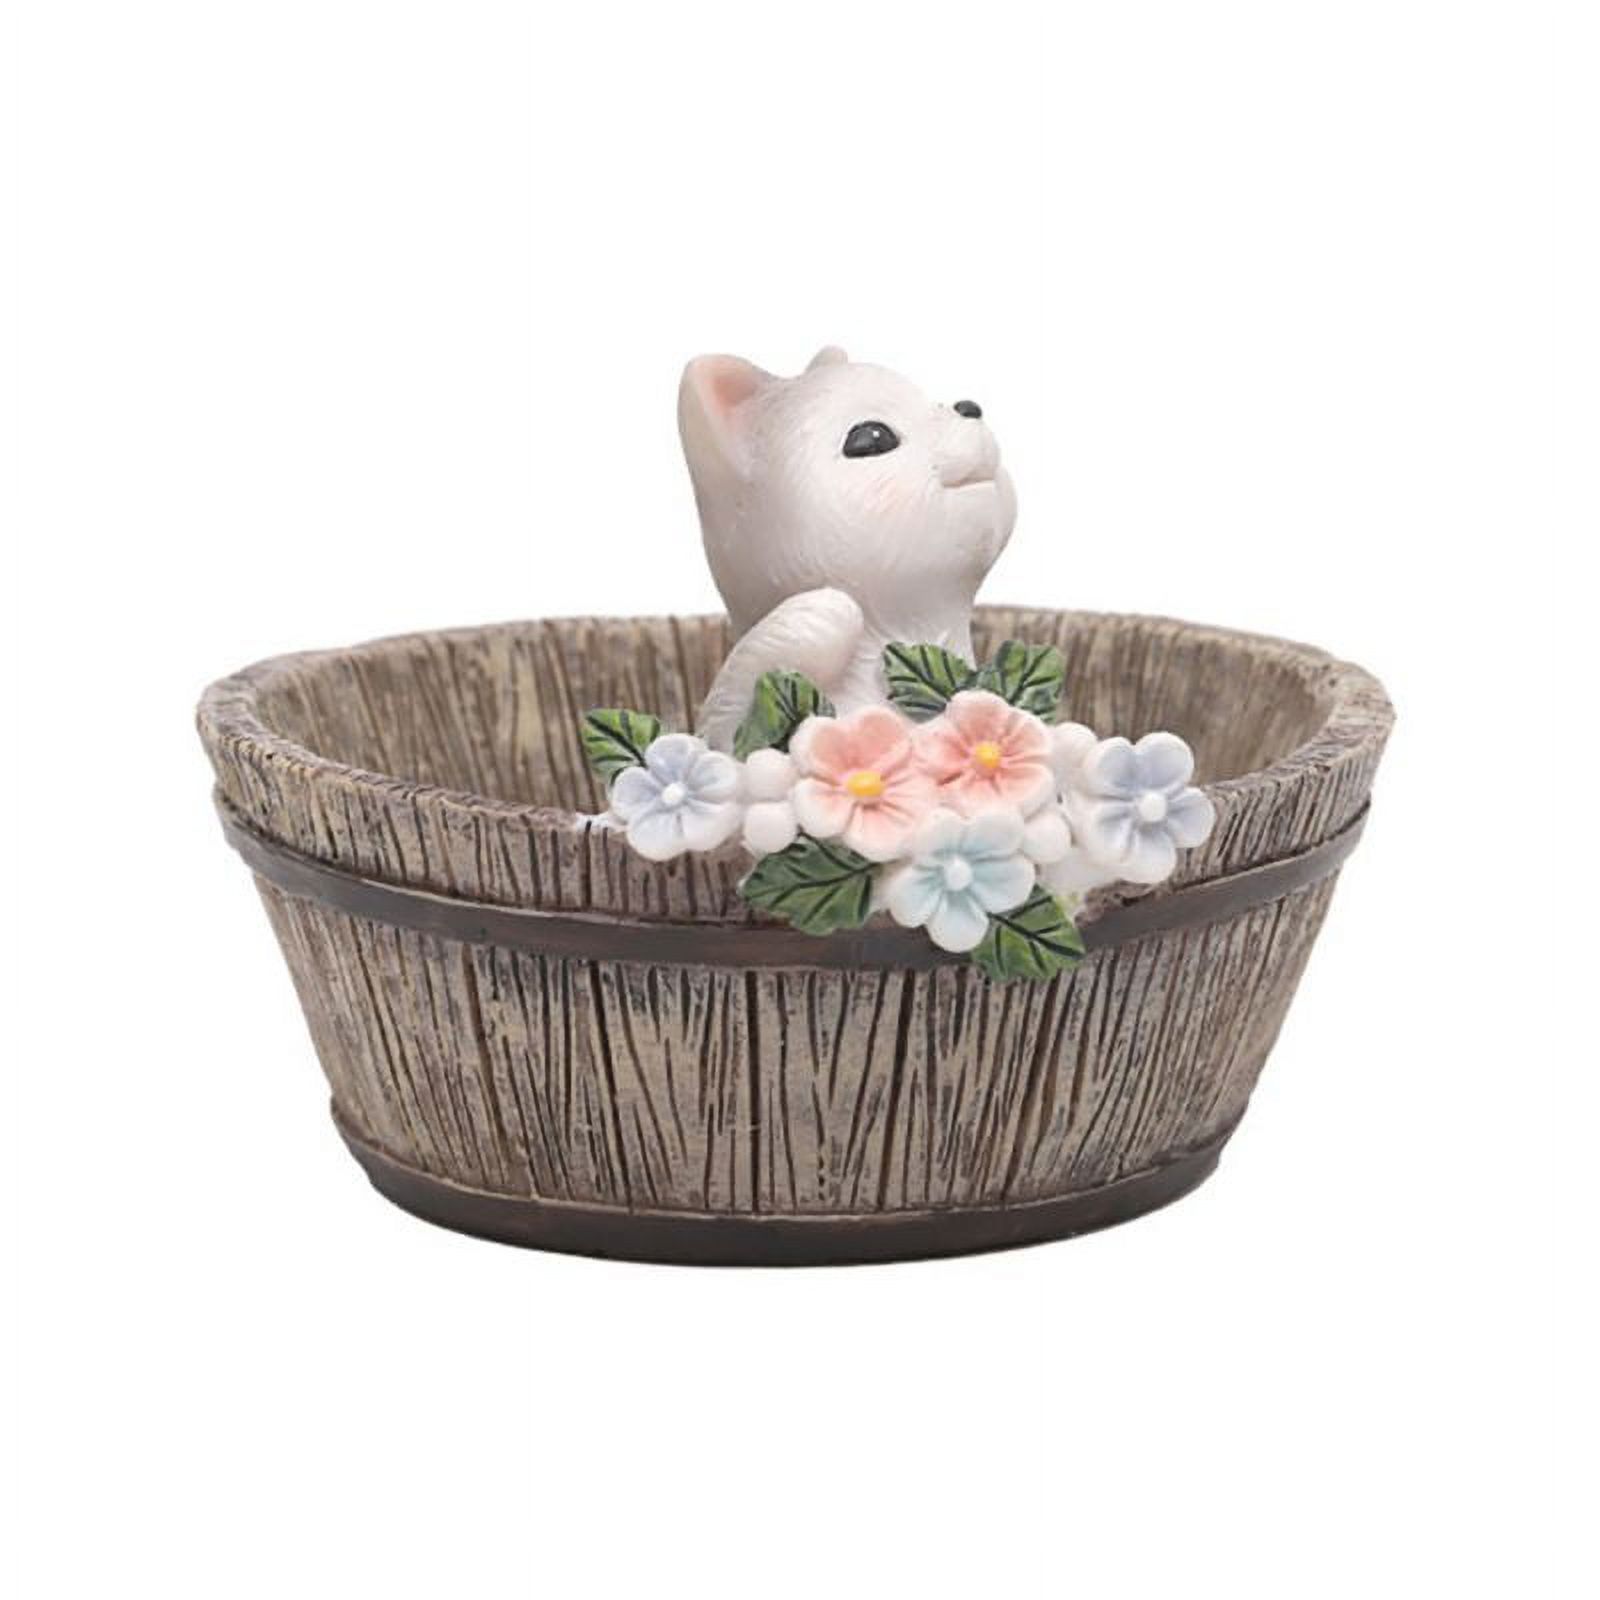 Cute Animal Meaty Flower Pot American Country Style Succulent Pots Resin Mini Flower Pots Fashion Flower Pots Planters - image 1 of 2